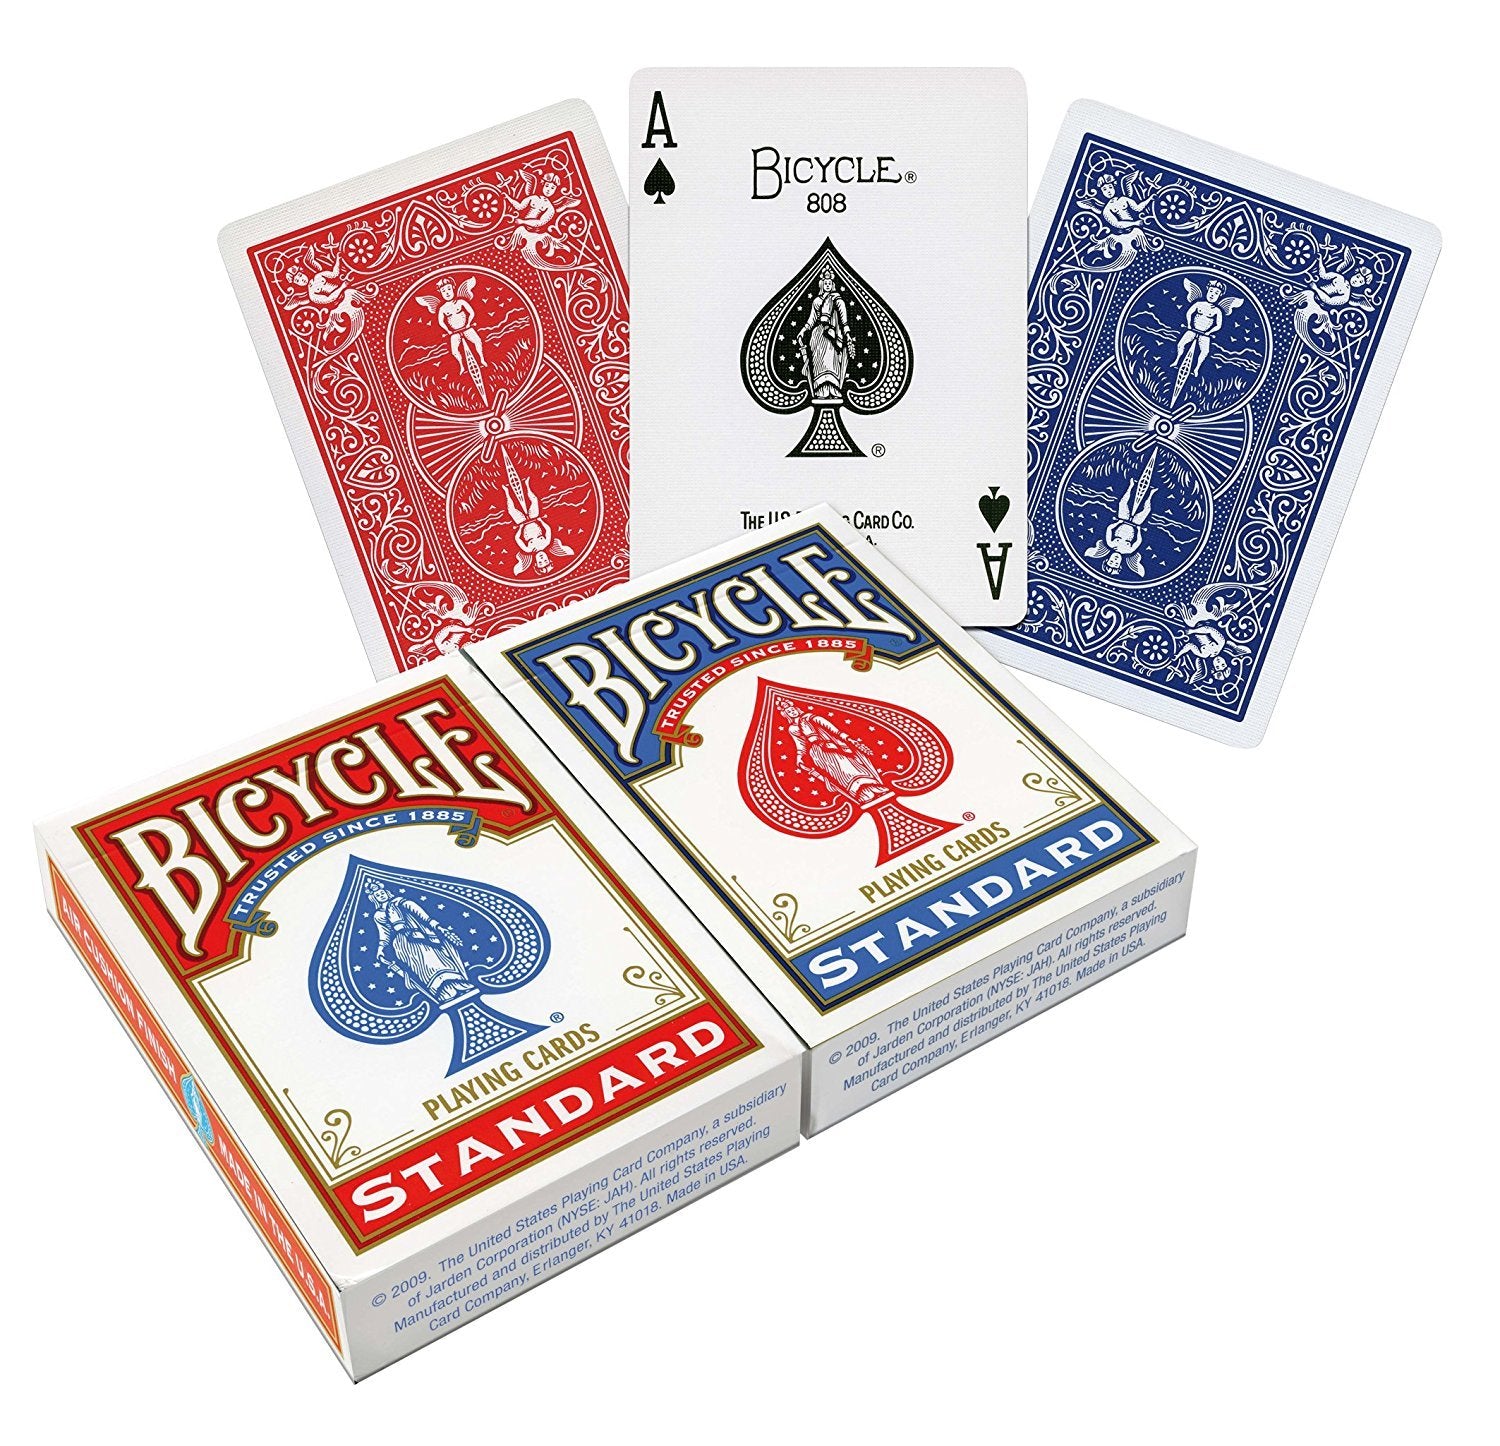 Bicycle Standard Face Playing Cards, 2 Piece